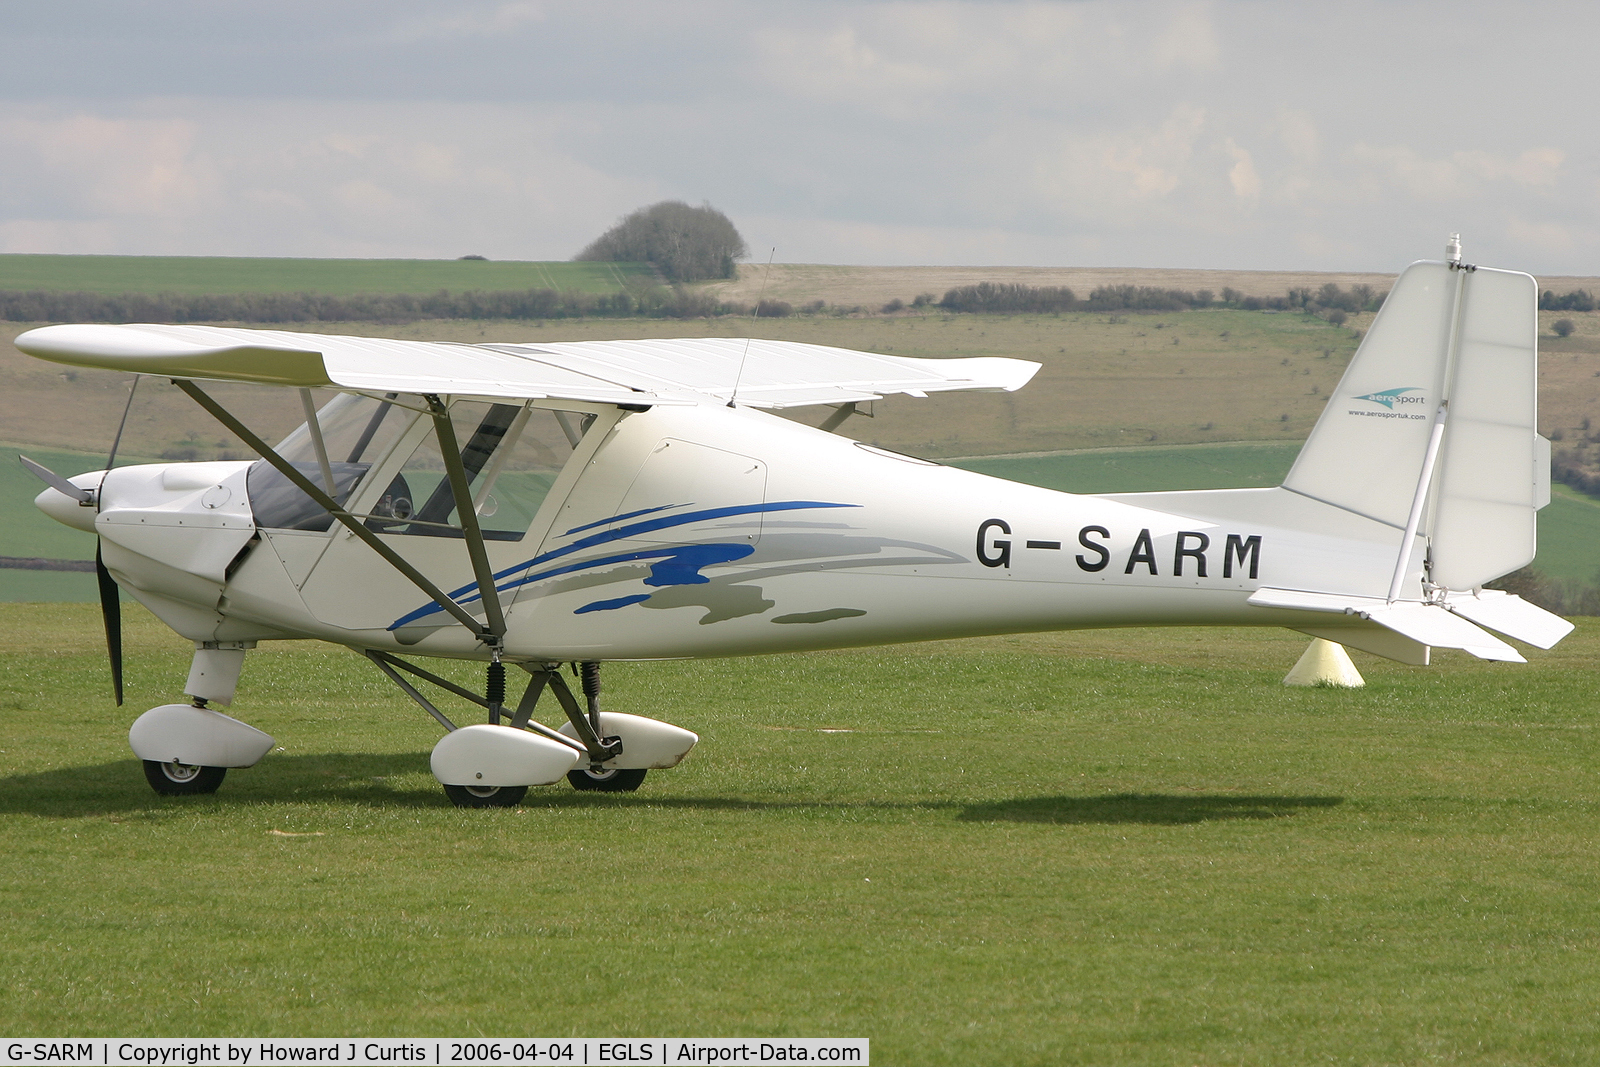 G-SARM, 2005 Comco Ikarus C42 FB100 C/N 0504-6674, Privately owned.